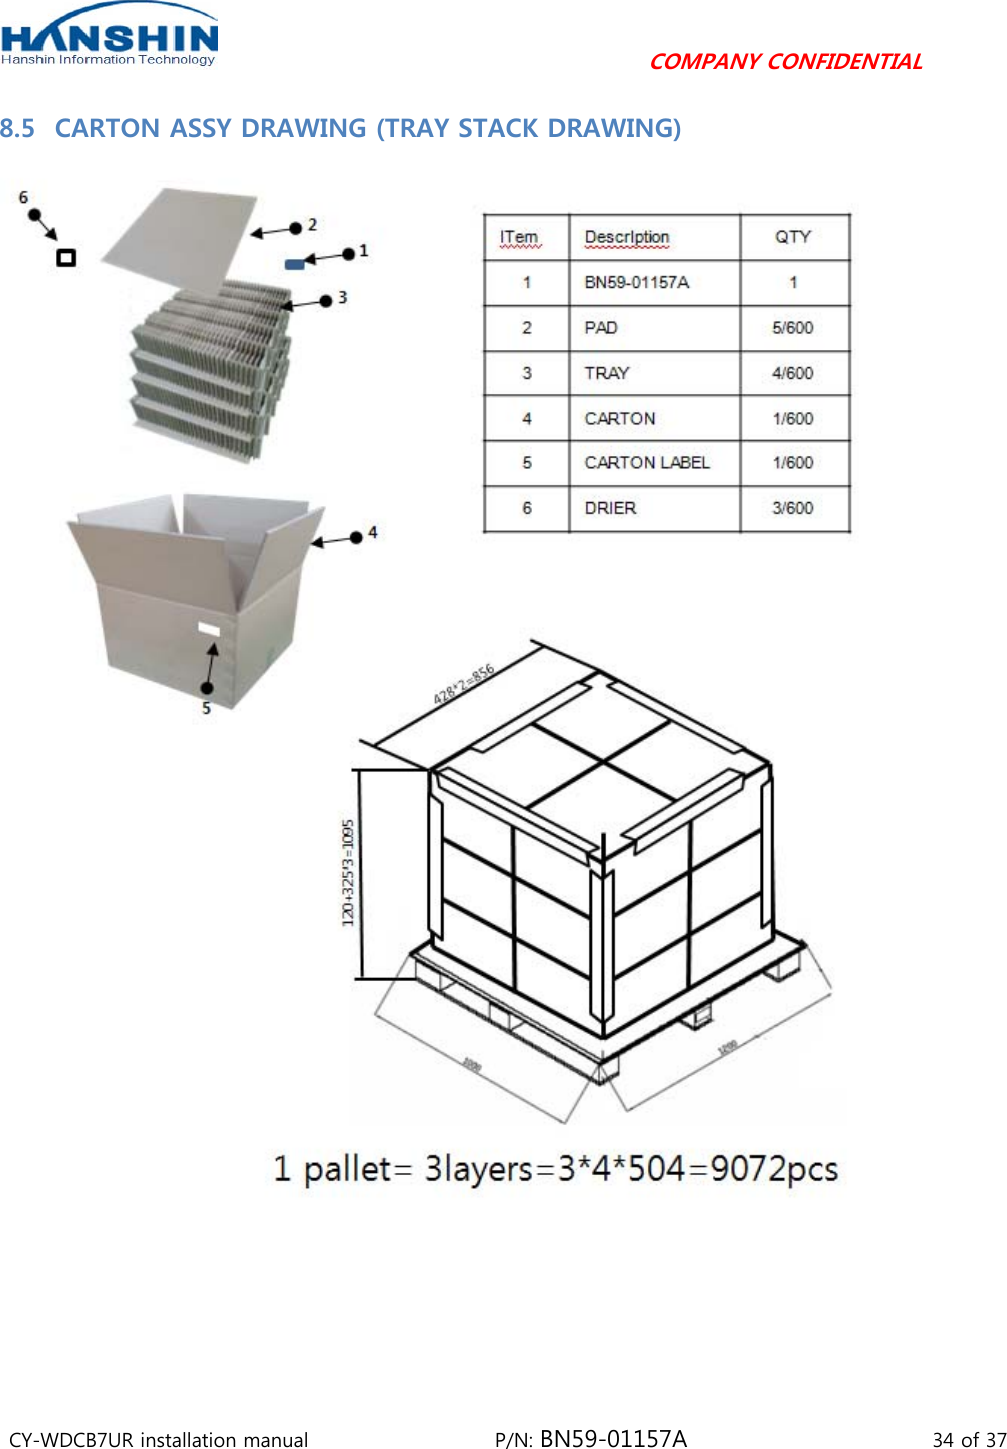                                         COMPANY CONFIDENTIAL CY-WDCB7UR installation manual                   P/N: BN59-01157A                         34 of 37 8.5 CARTON ASSY DRAWING (TRAY STACK DRAWING)   